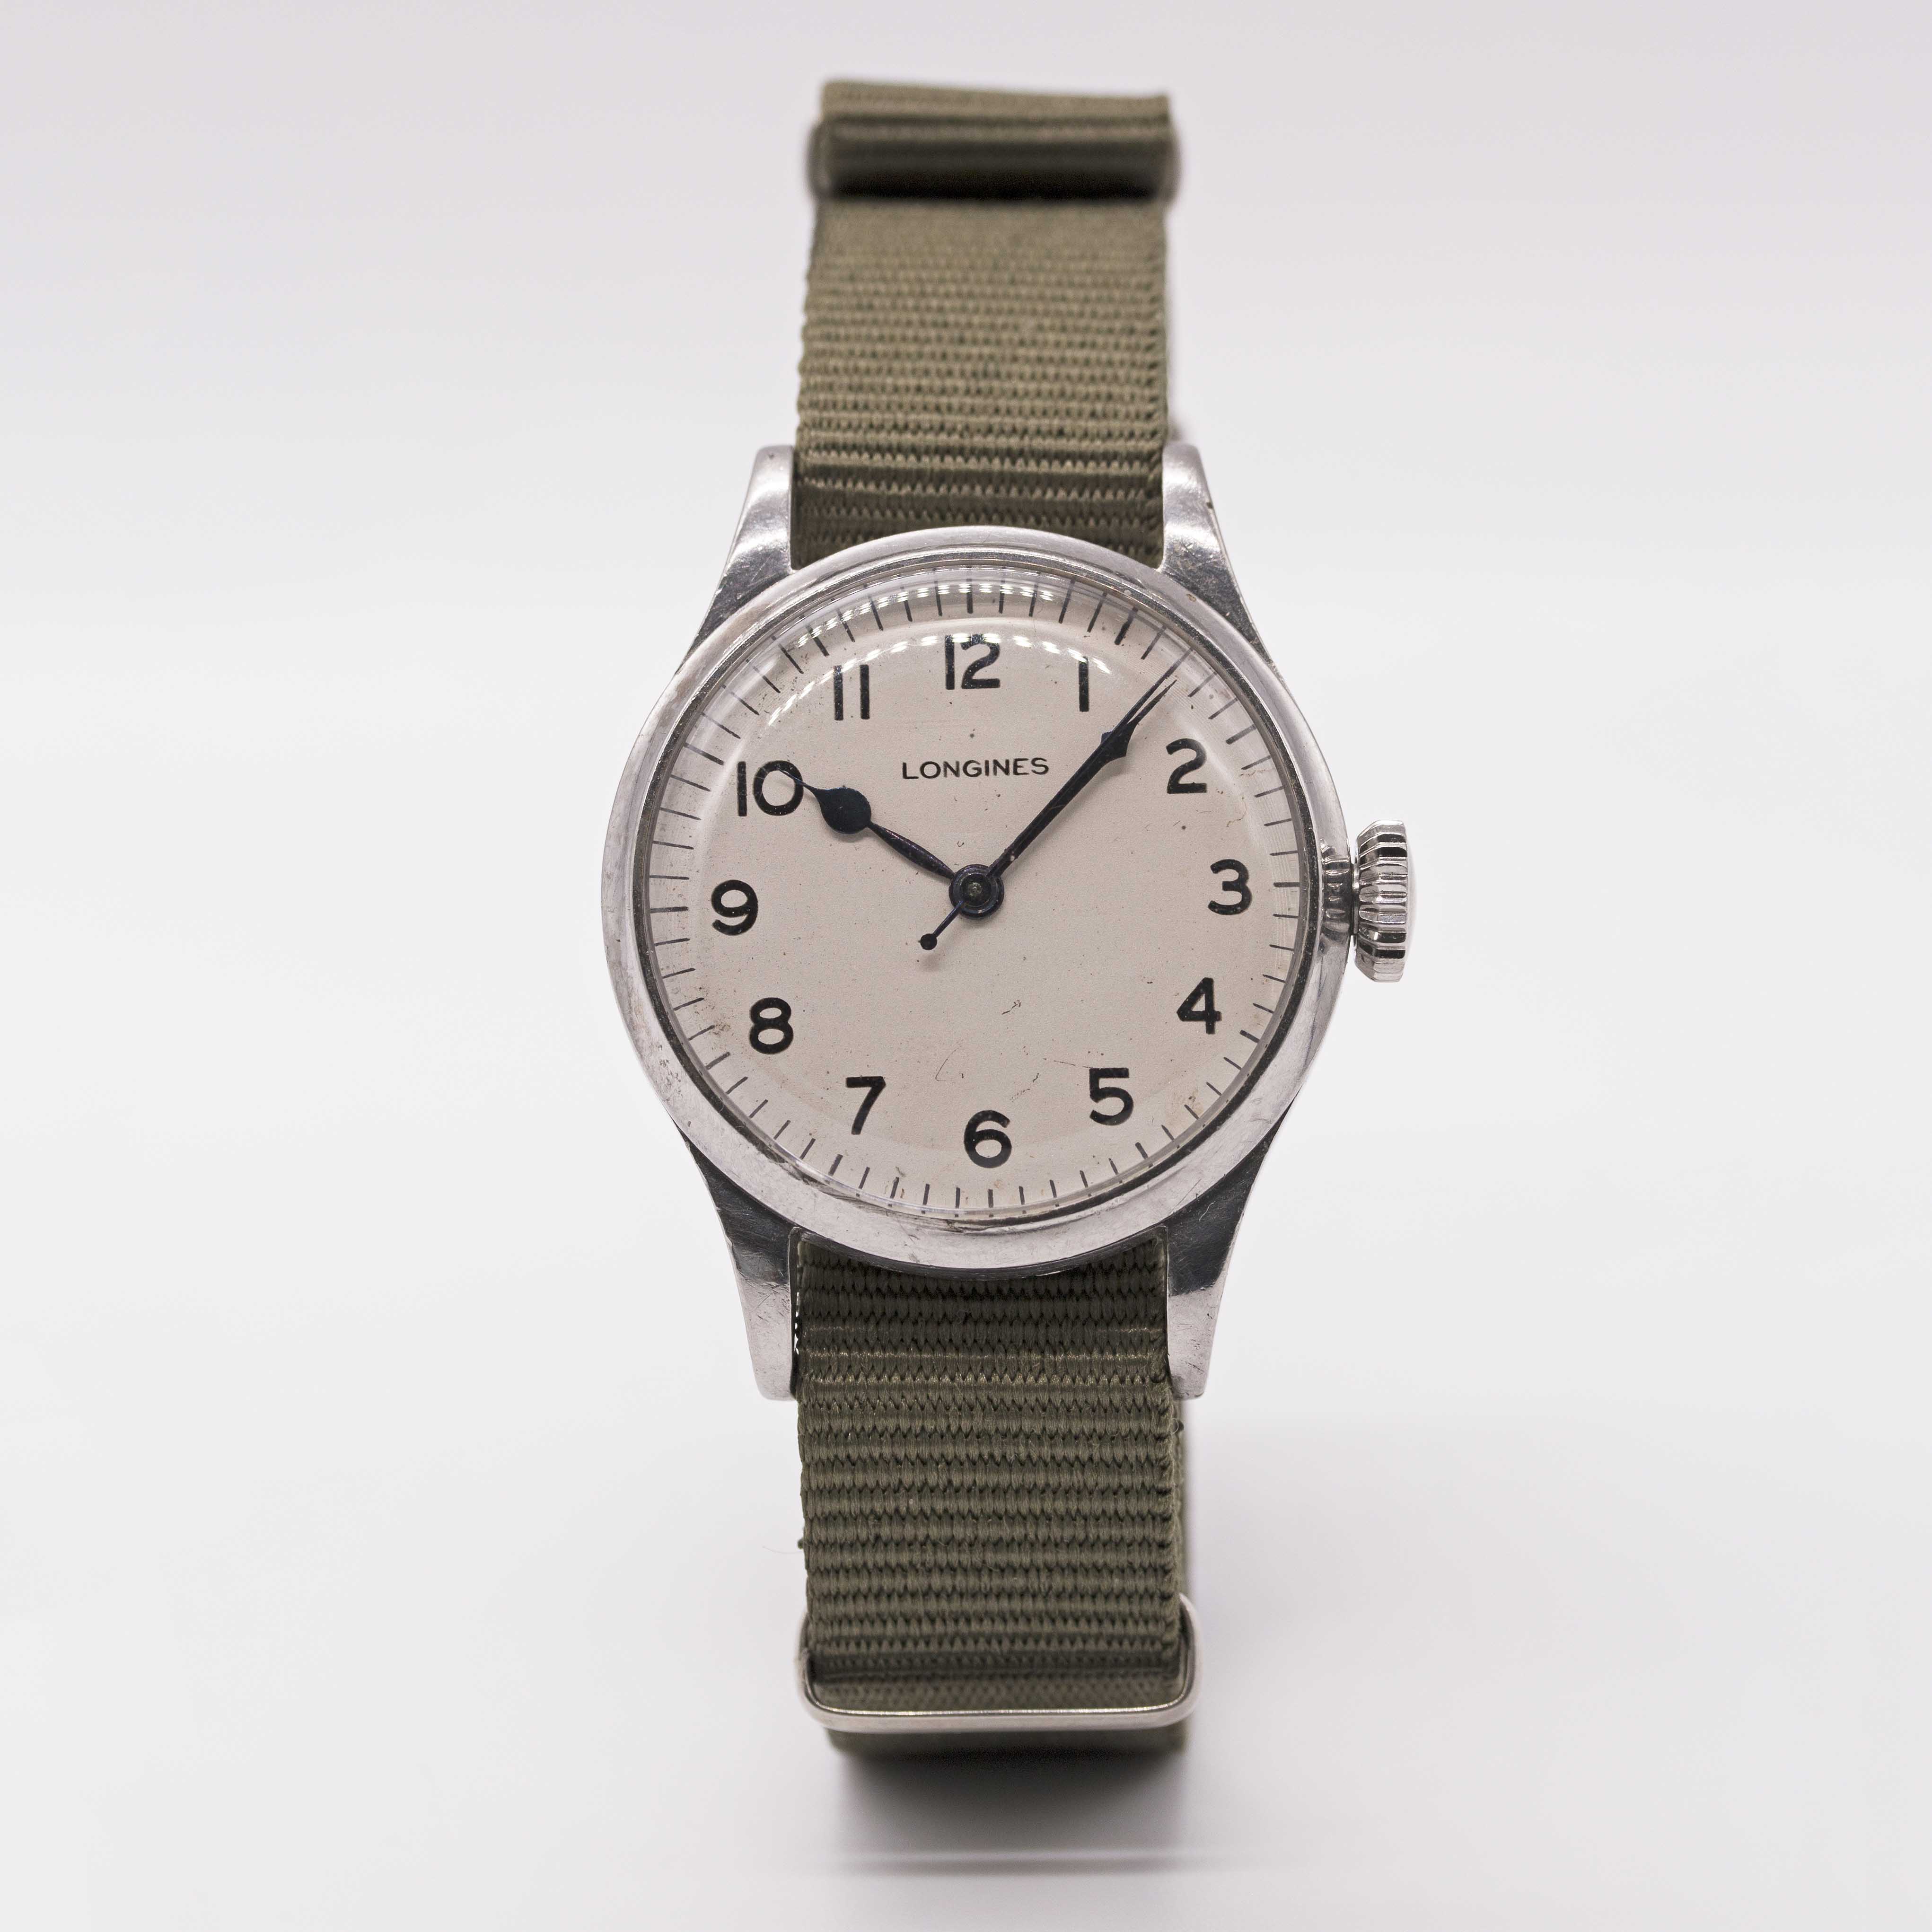 A GENTLEMAN'S BRITISH MILITARY LONGINES RAF PILOTS WRIST WATCH CIRCA 1940, WITH WHITE MOD DIAL - Image 2 of 9